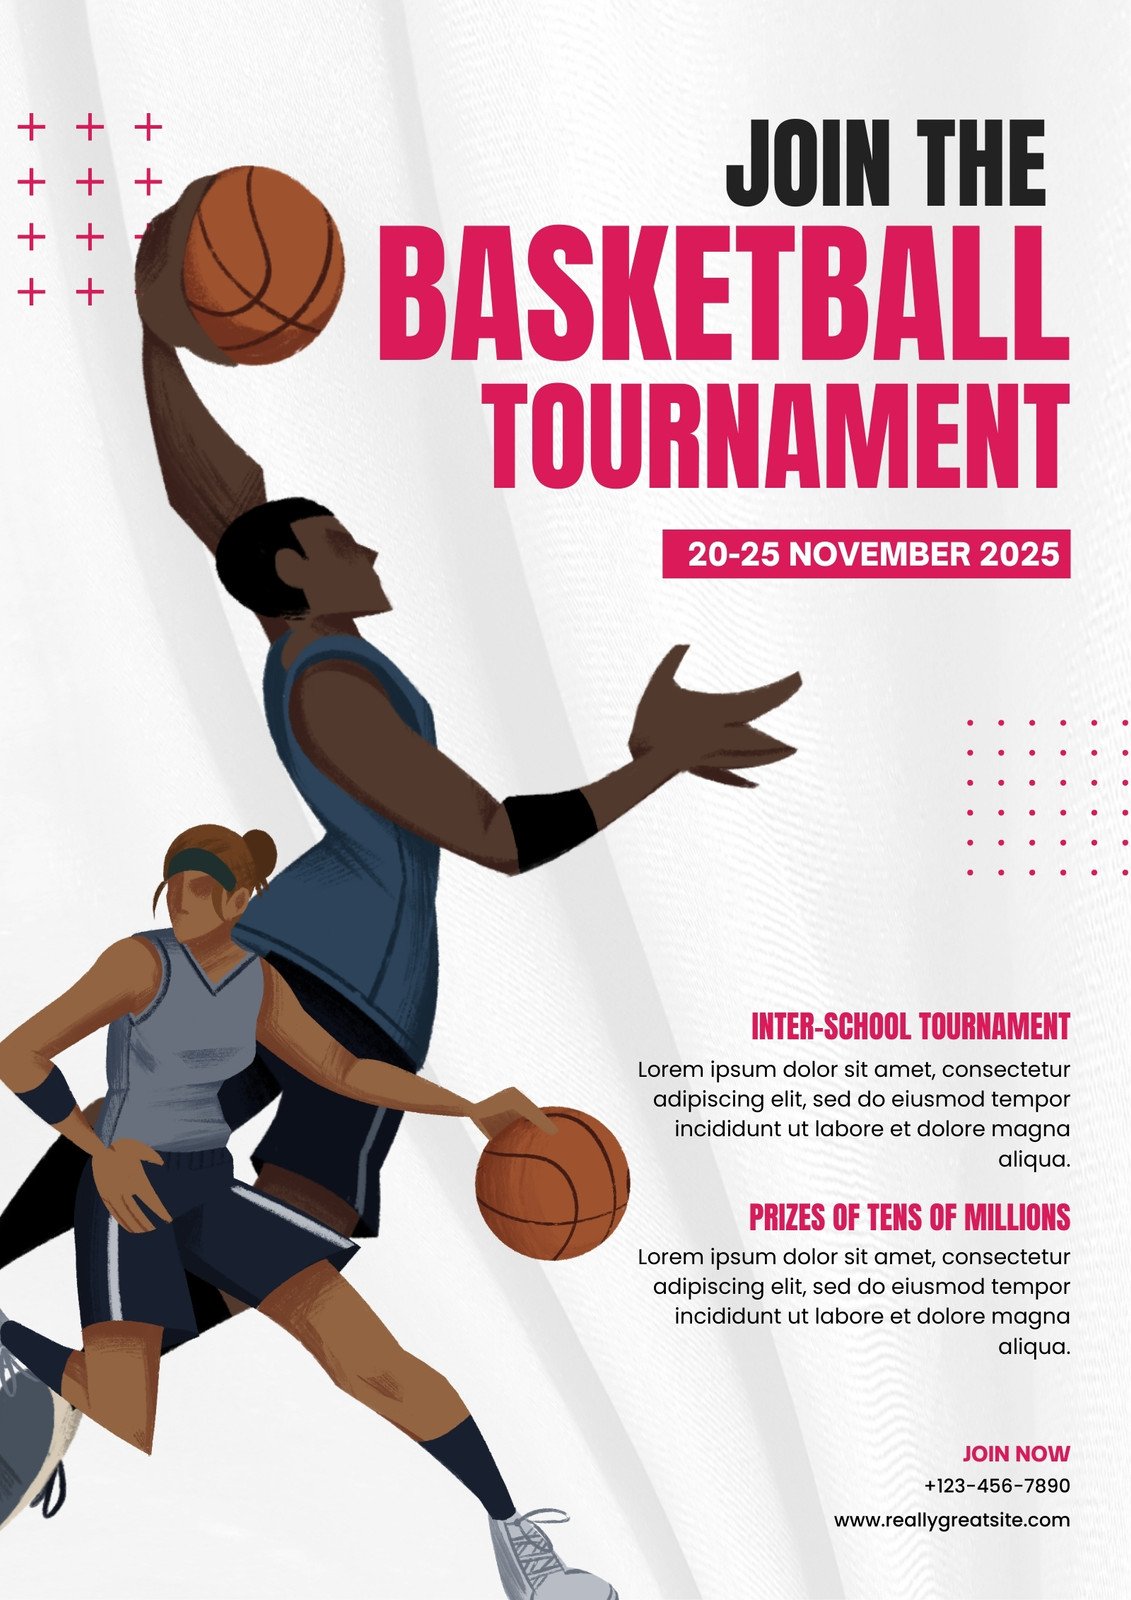 Free printable, customizable sports poster templates | Canva